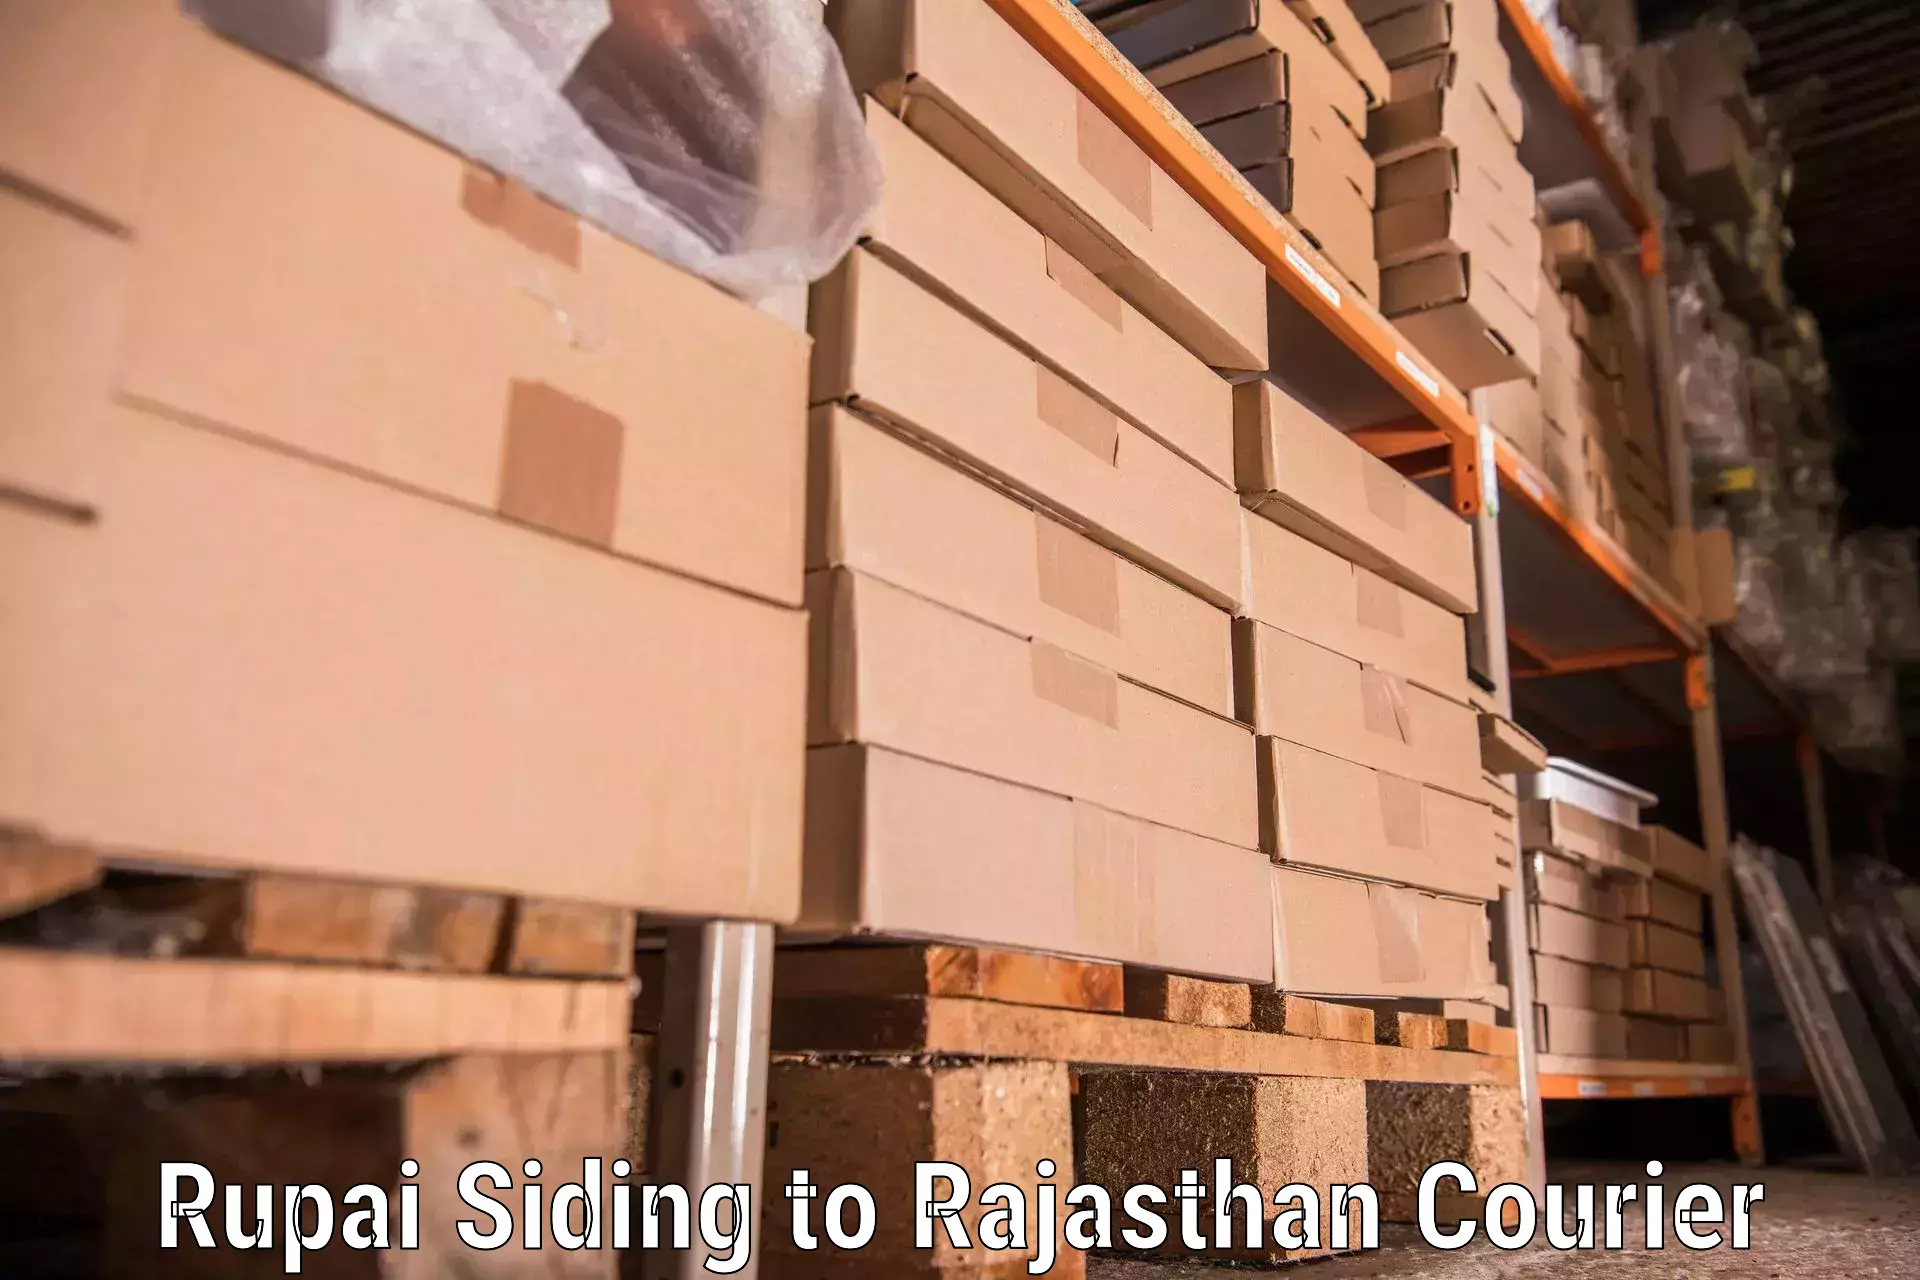 Professional movers and packers Rupai Siding to Udaipurwati